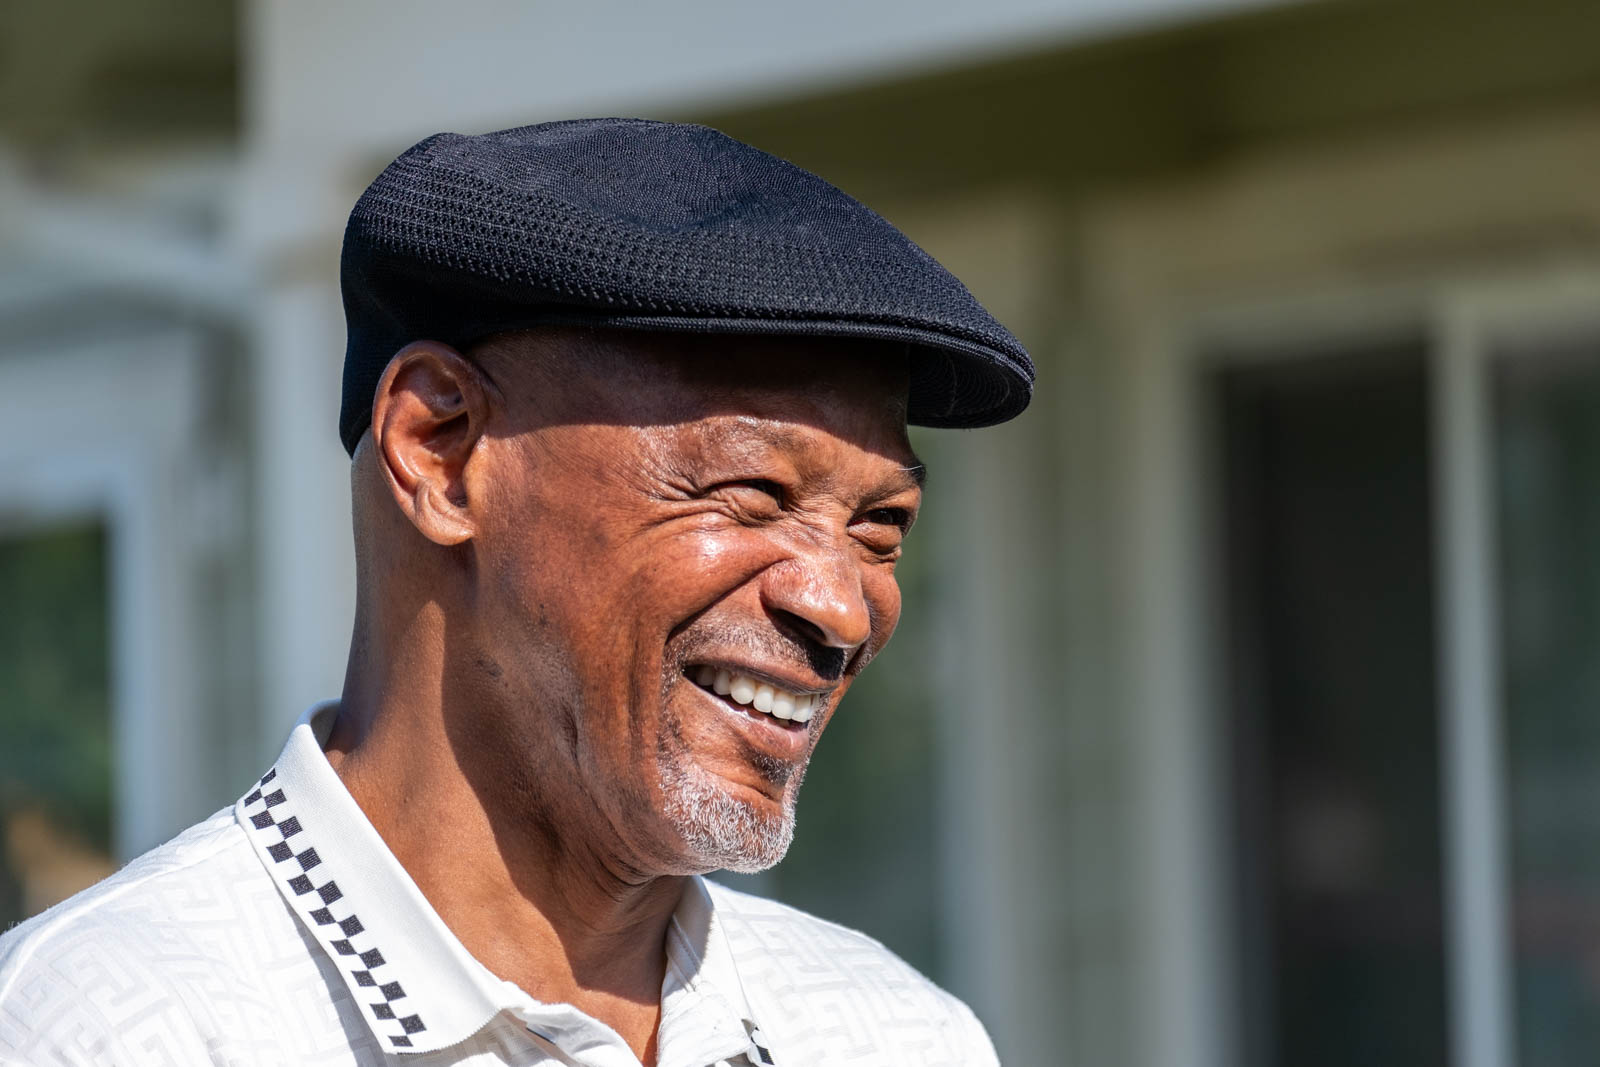 a photograph of a smiling older Black man with a hat smiling